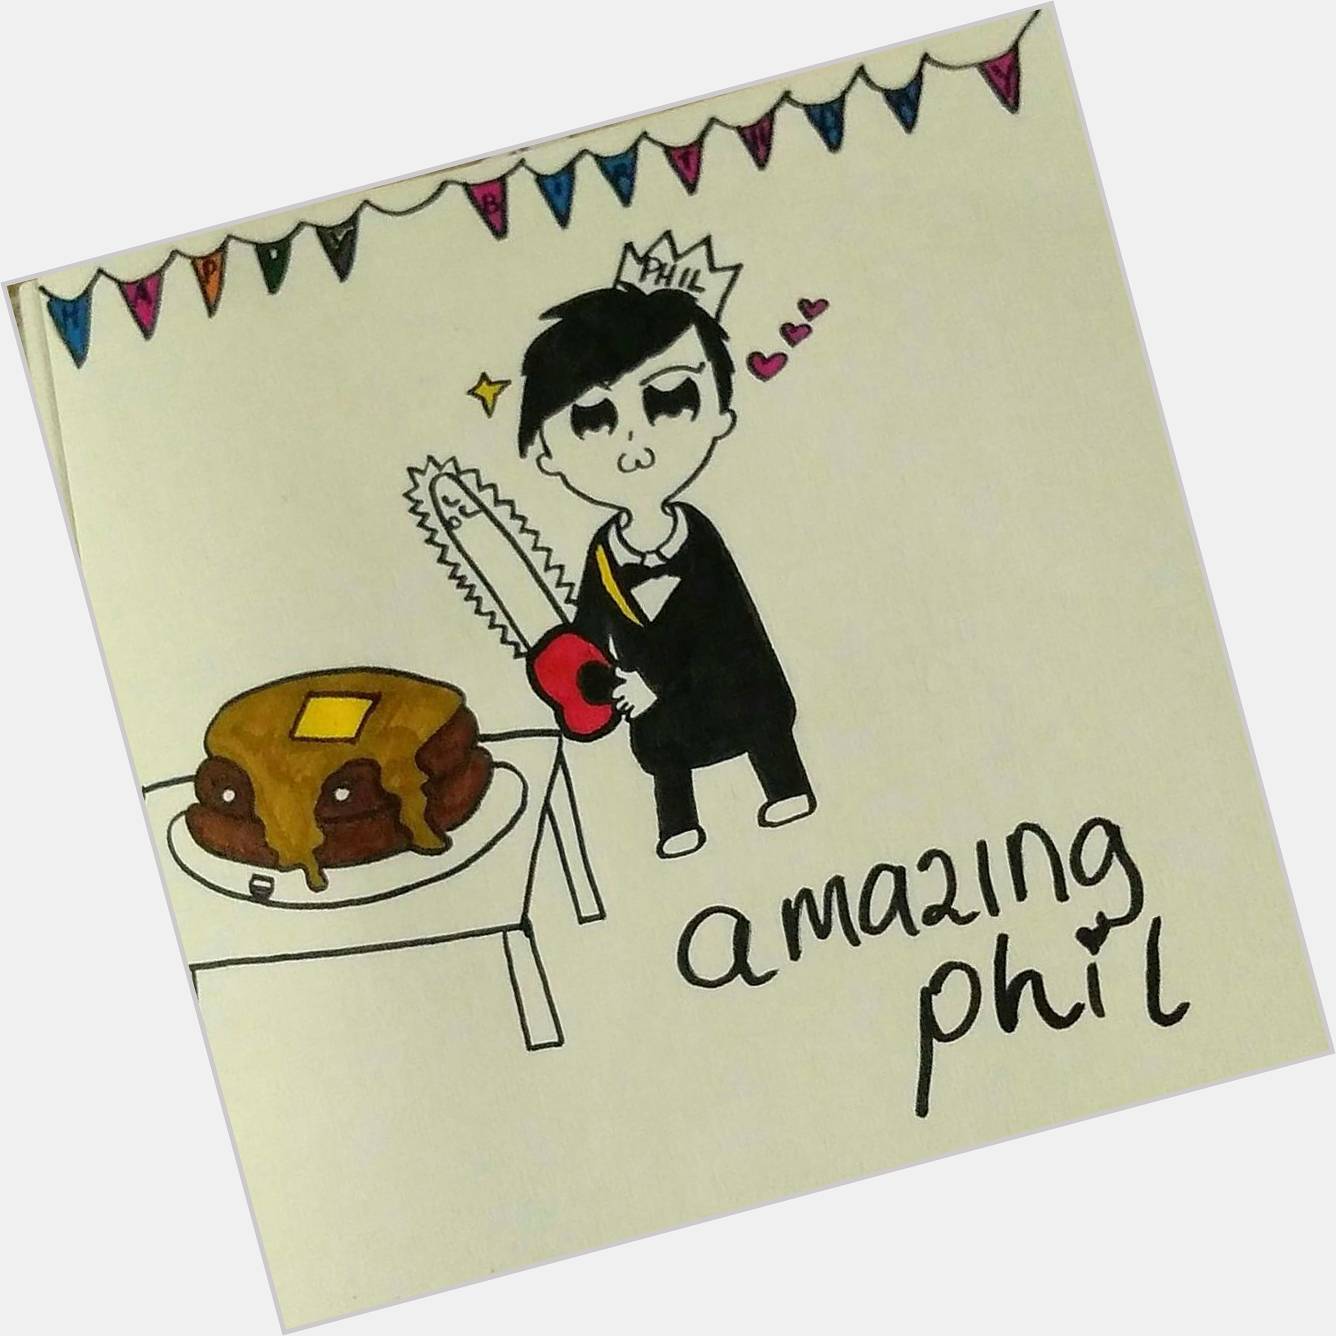   Happy (early) birthday, Phil Lester! 

I do hope you watched pop team epic  